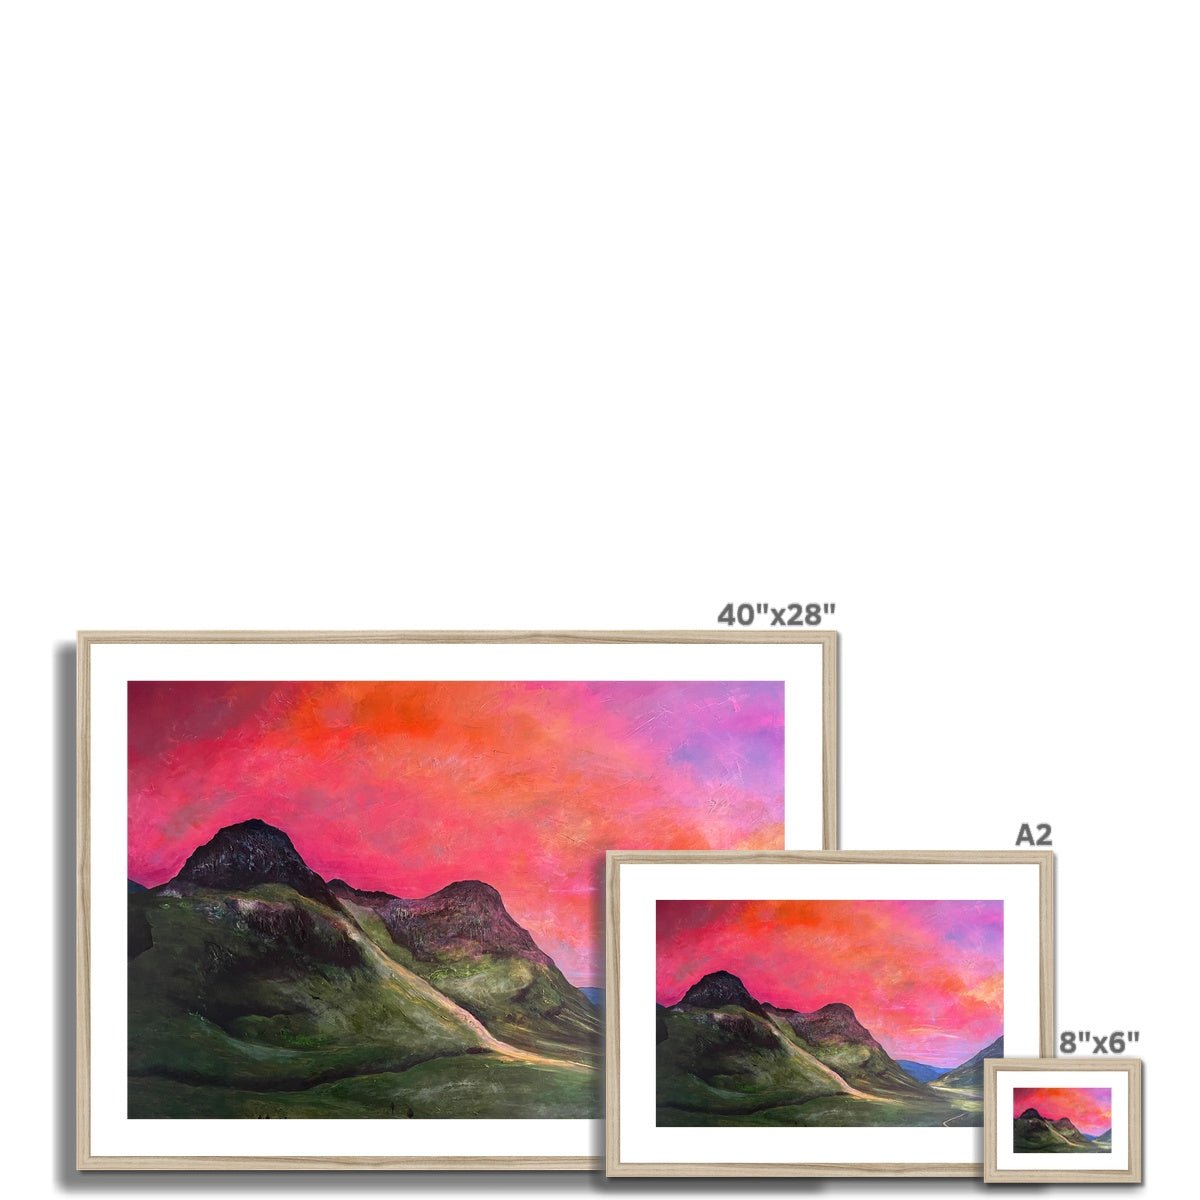 Glencoe Dusk Painting | Framed & Mounted Prints From Scotland-Framed & Mounted Prints-Glencoe Art Gallery-Paintings, Prints, Homeware, Art Gifts From Scotland By Scottish Artist Kevin Hunter